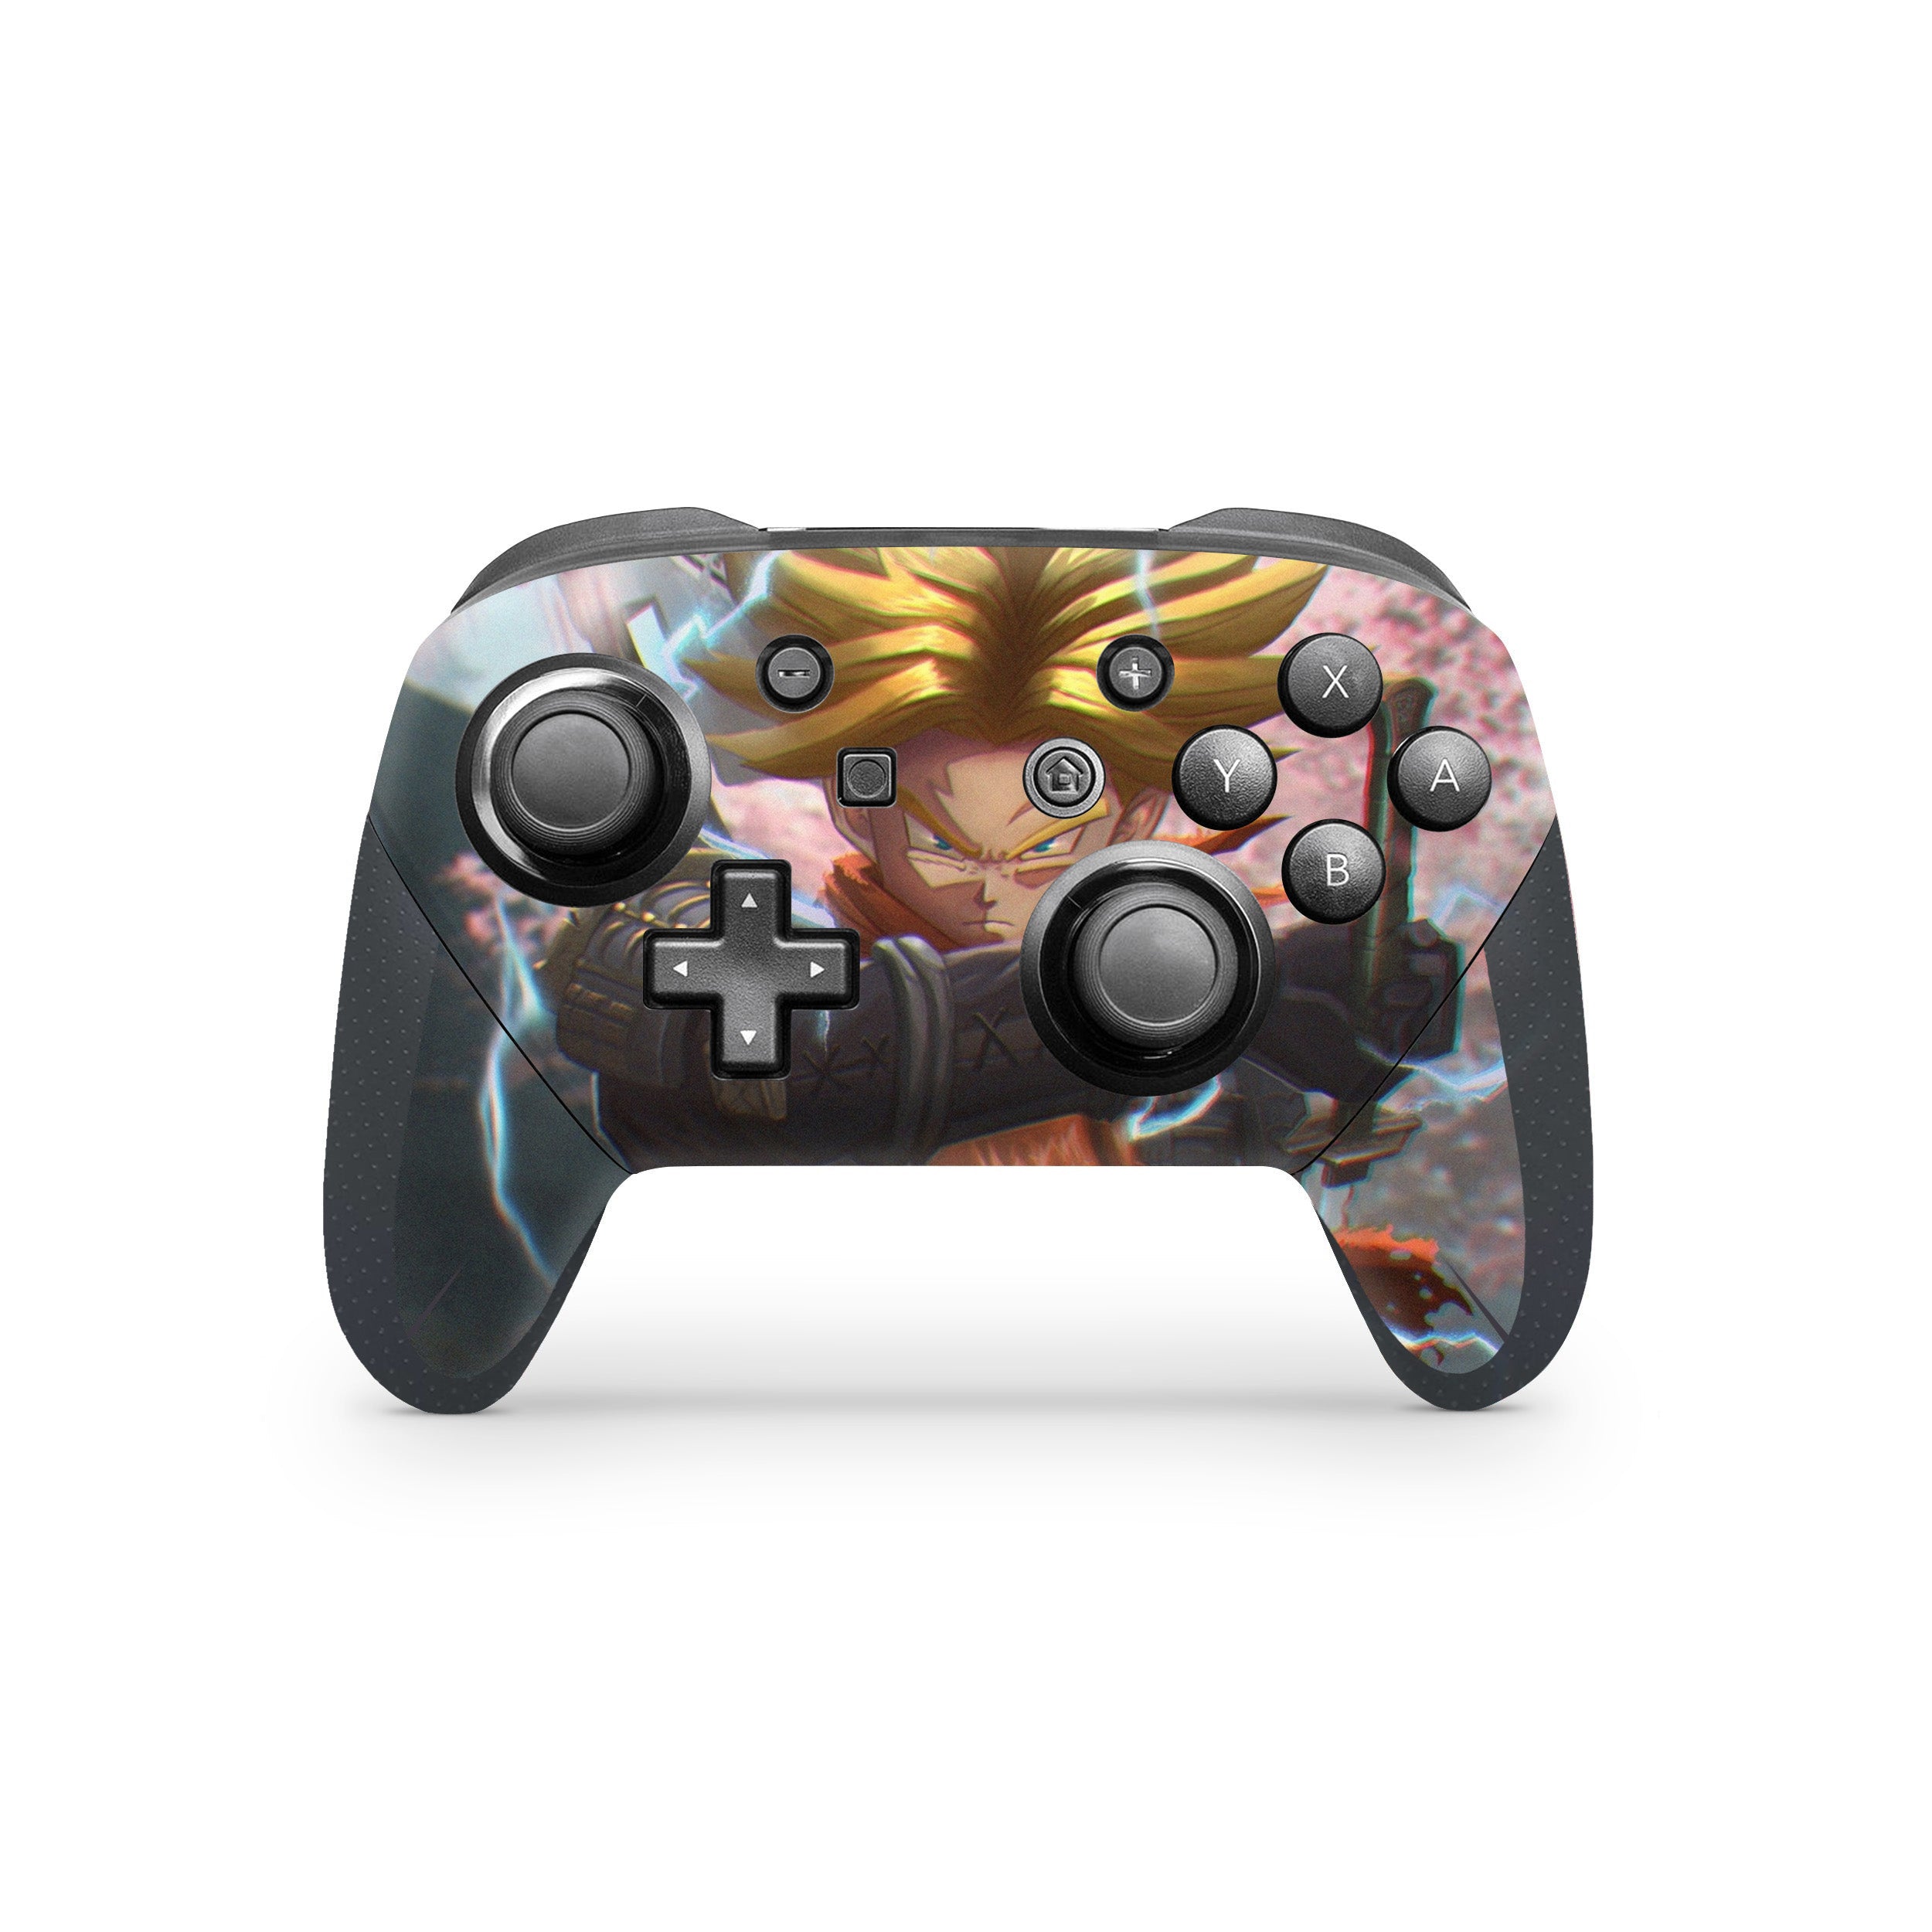 A video game skin featuring a Dragon Ball Super Trunks design for the Switch Pro Controller.